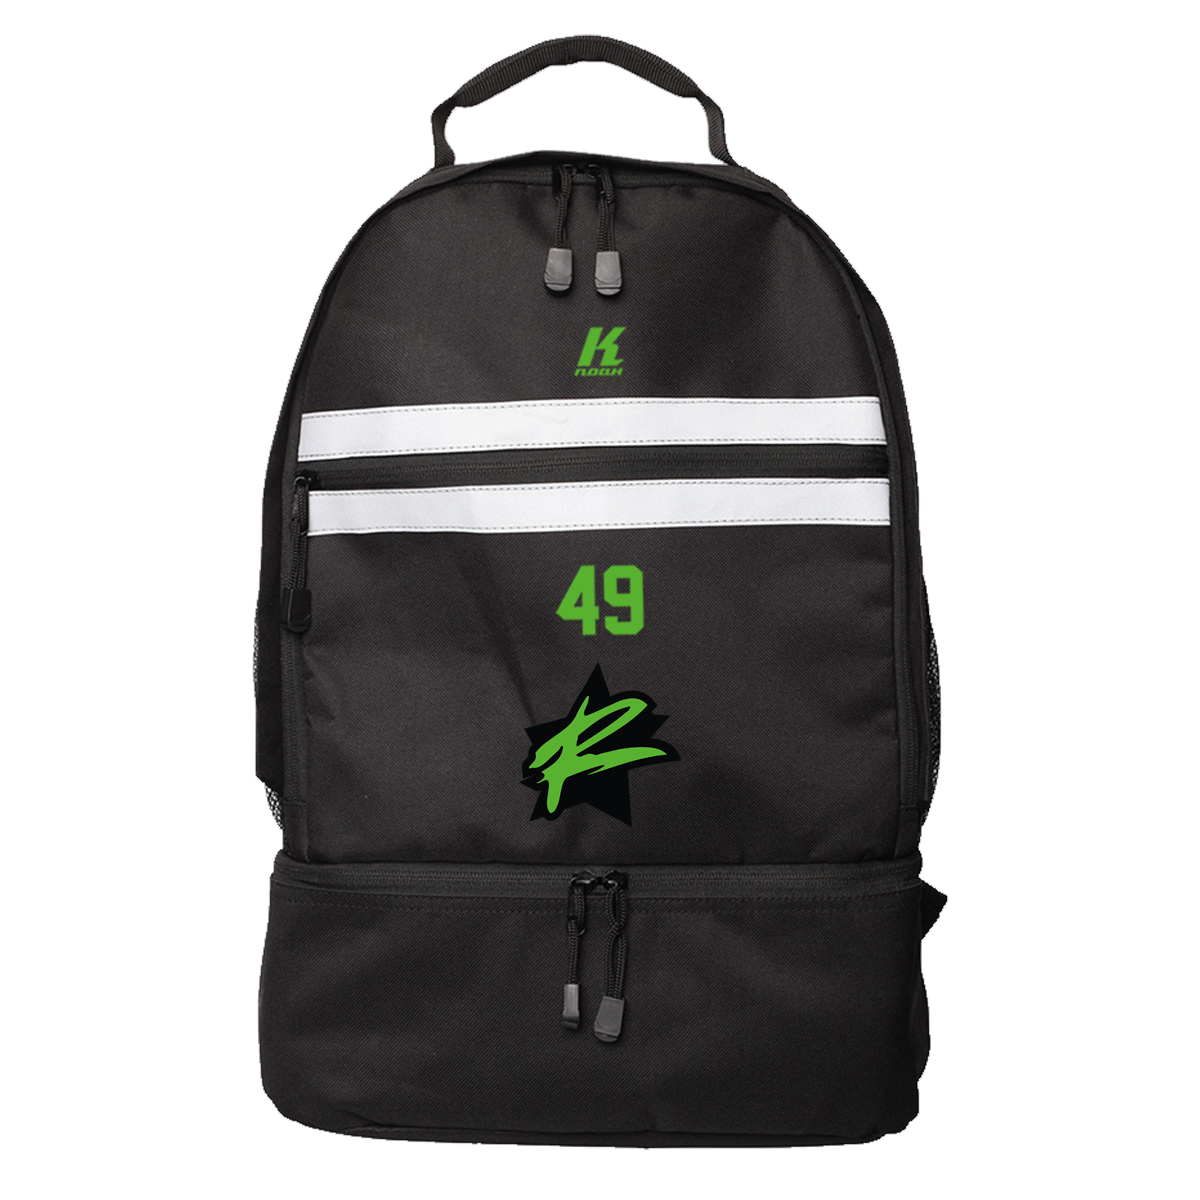 Rebels Players Backpack with Playernumber or Initials